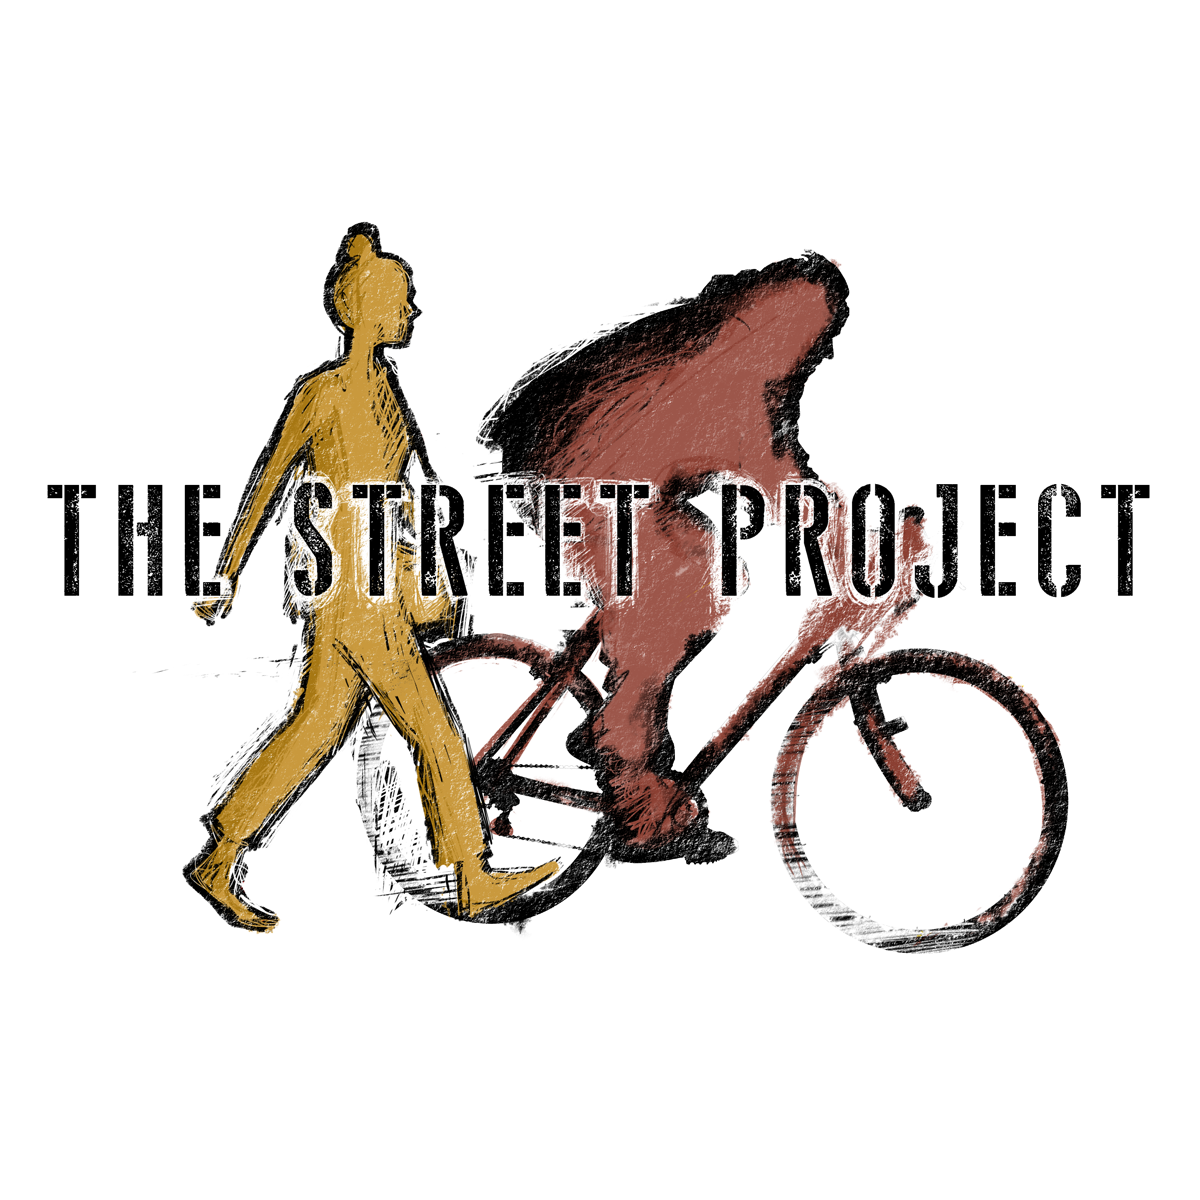 The Street Project — Film & Discussion